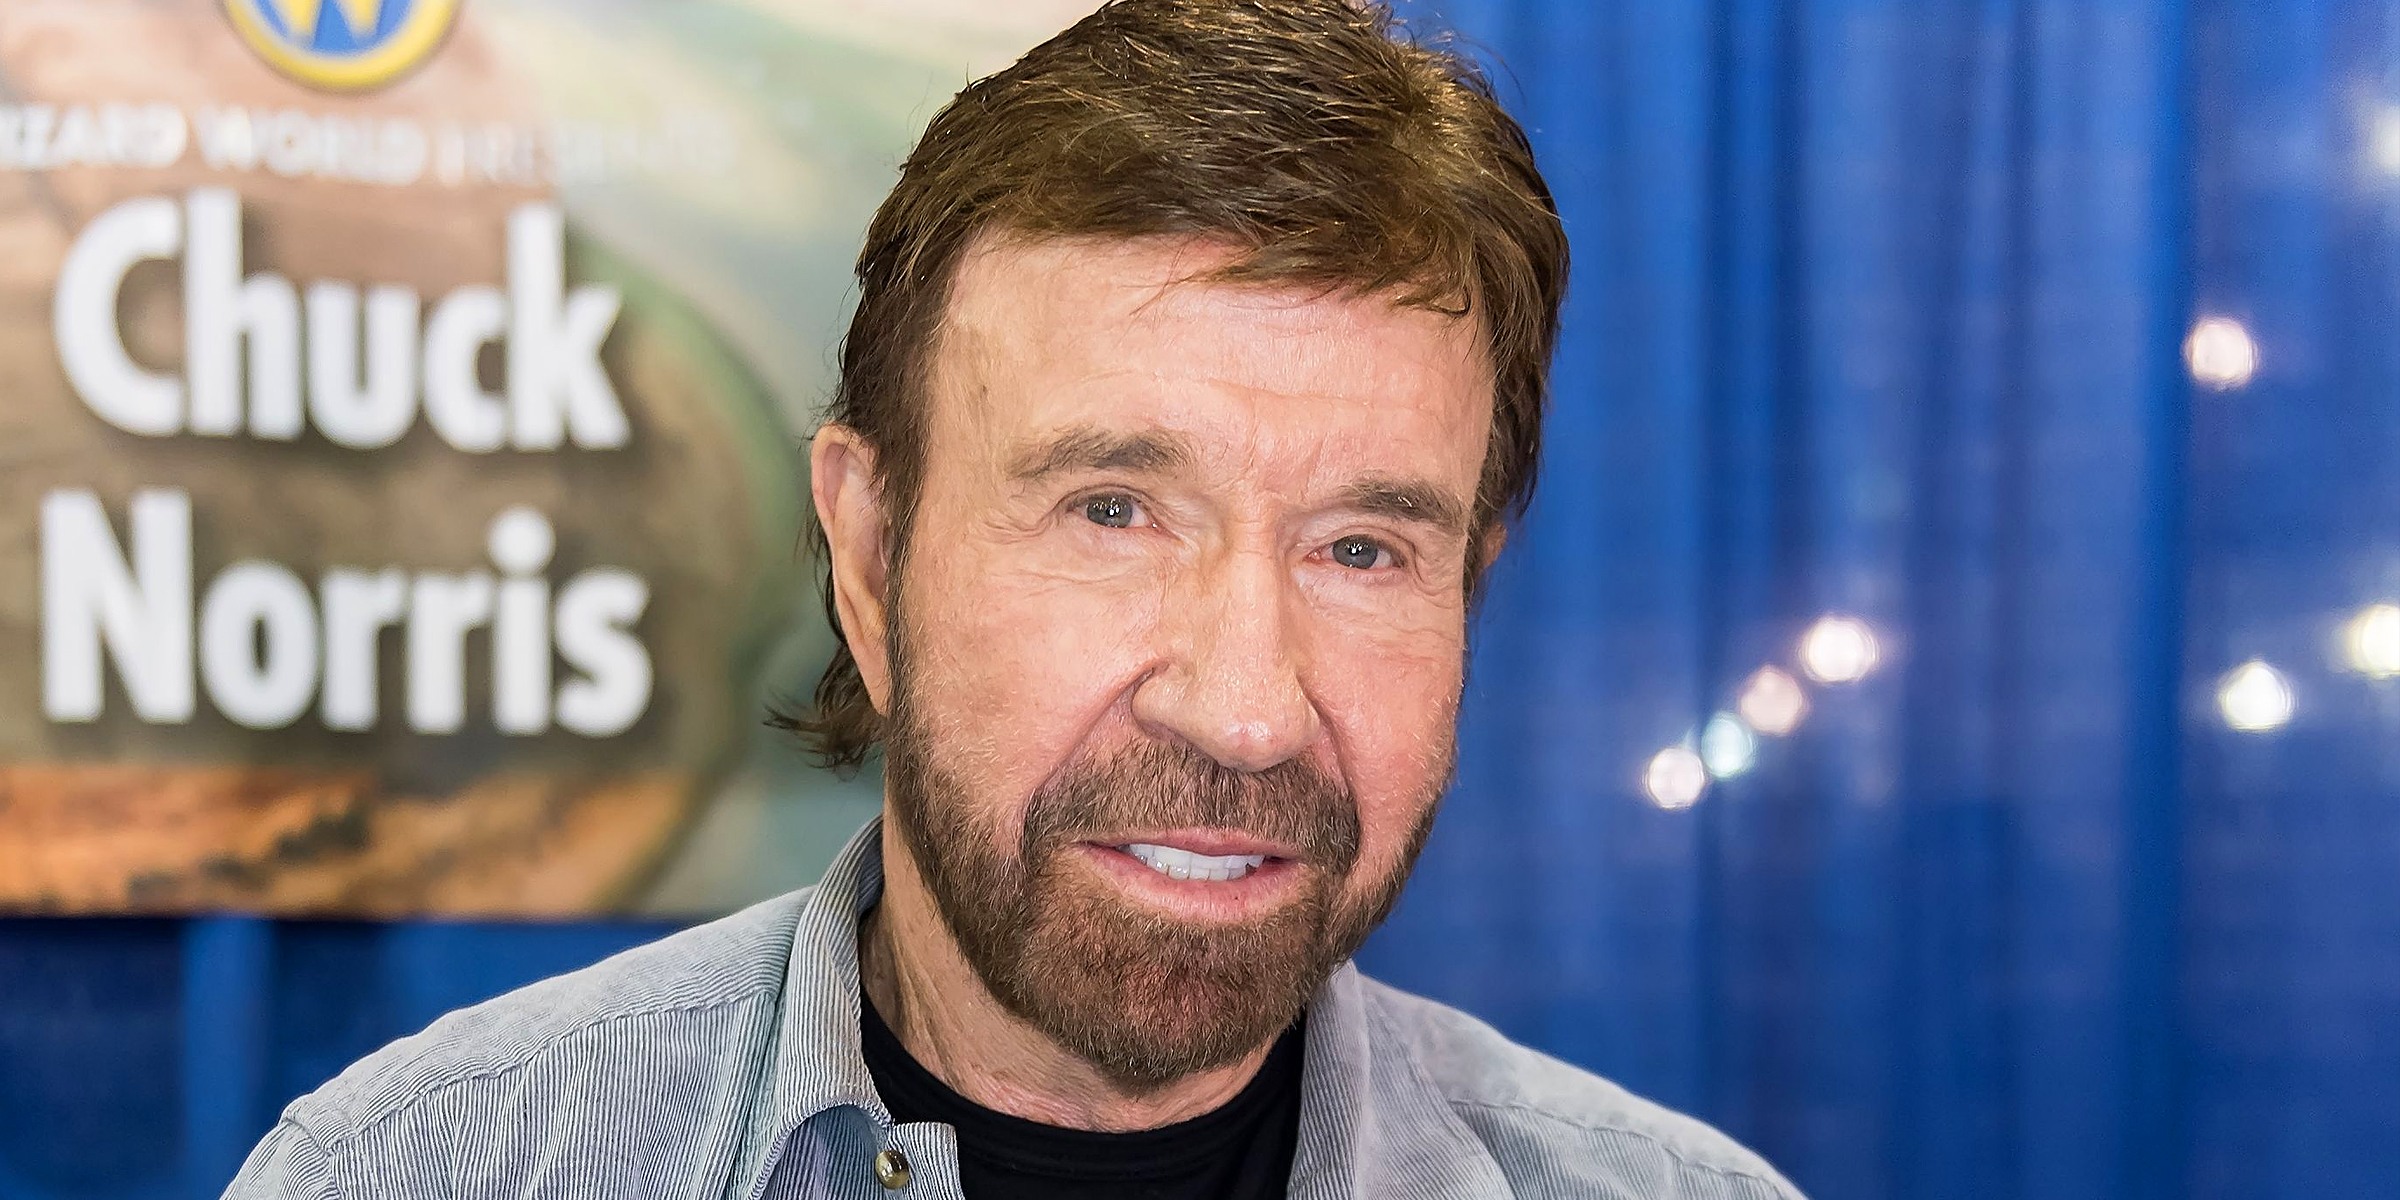 Chuck Norris | Source: Getty Images